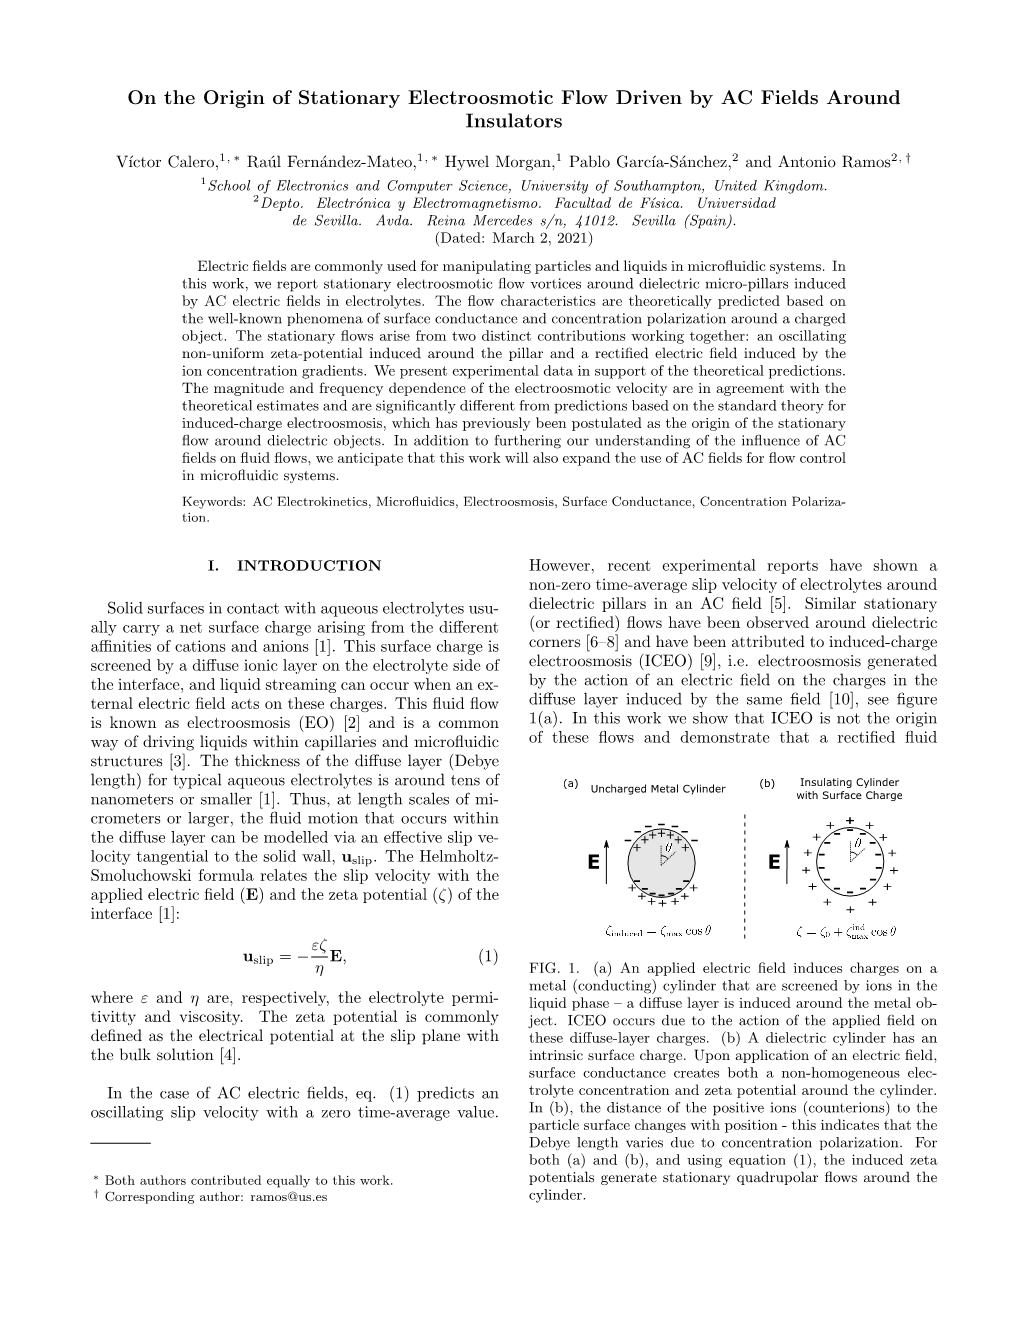 On the Origin of Stationary Electroosmotic Flow Driven by AC Fields Around Insulators E E